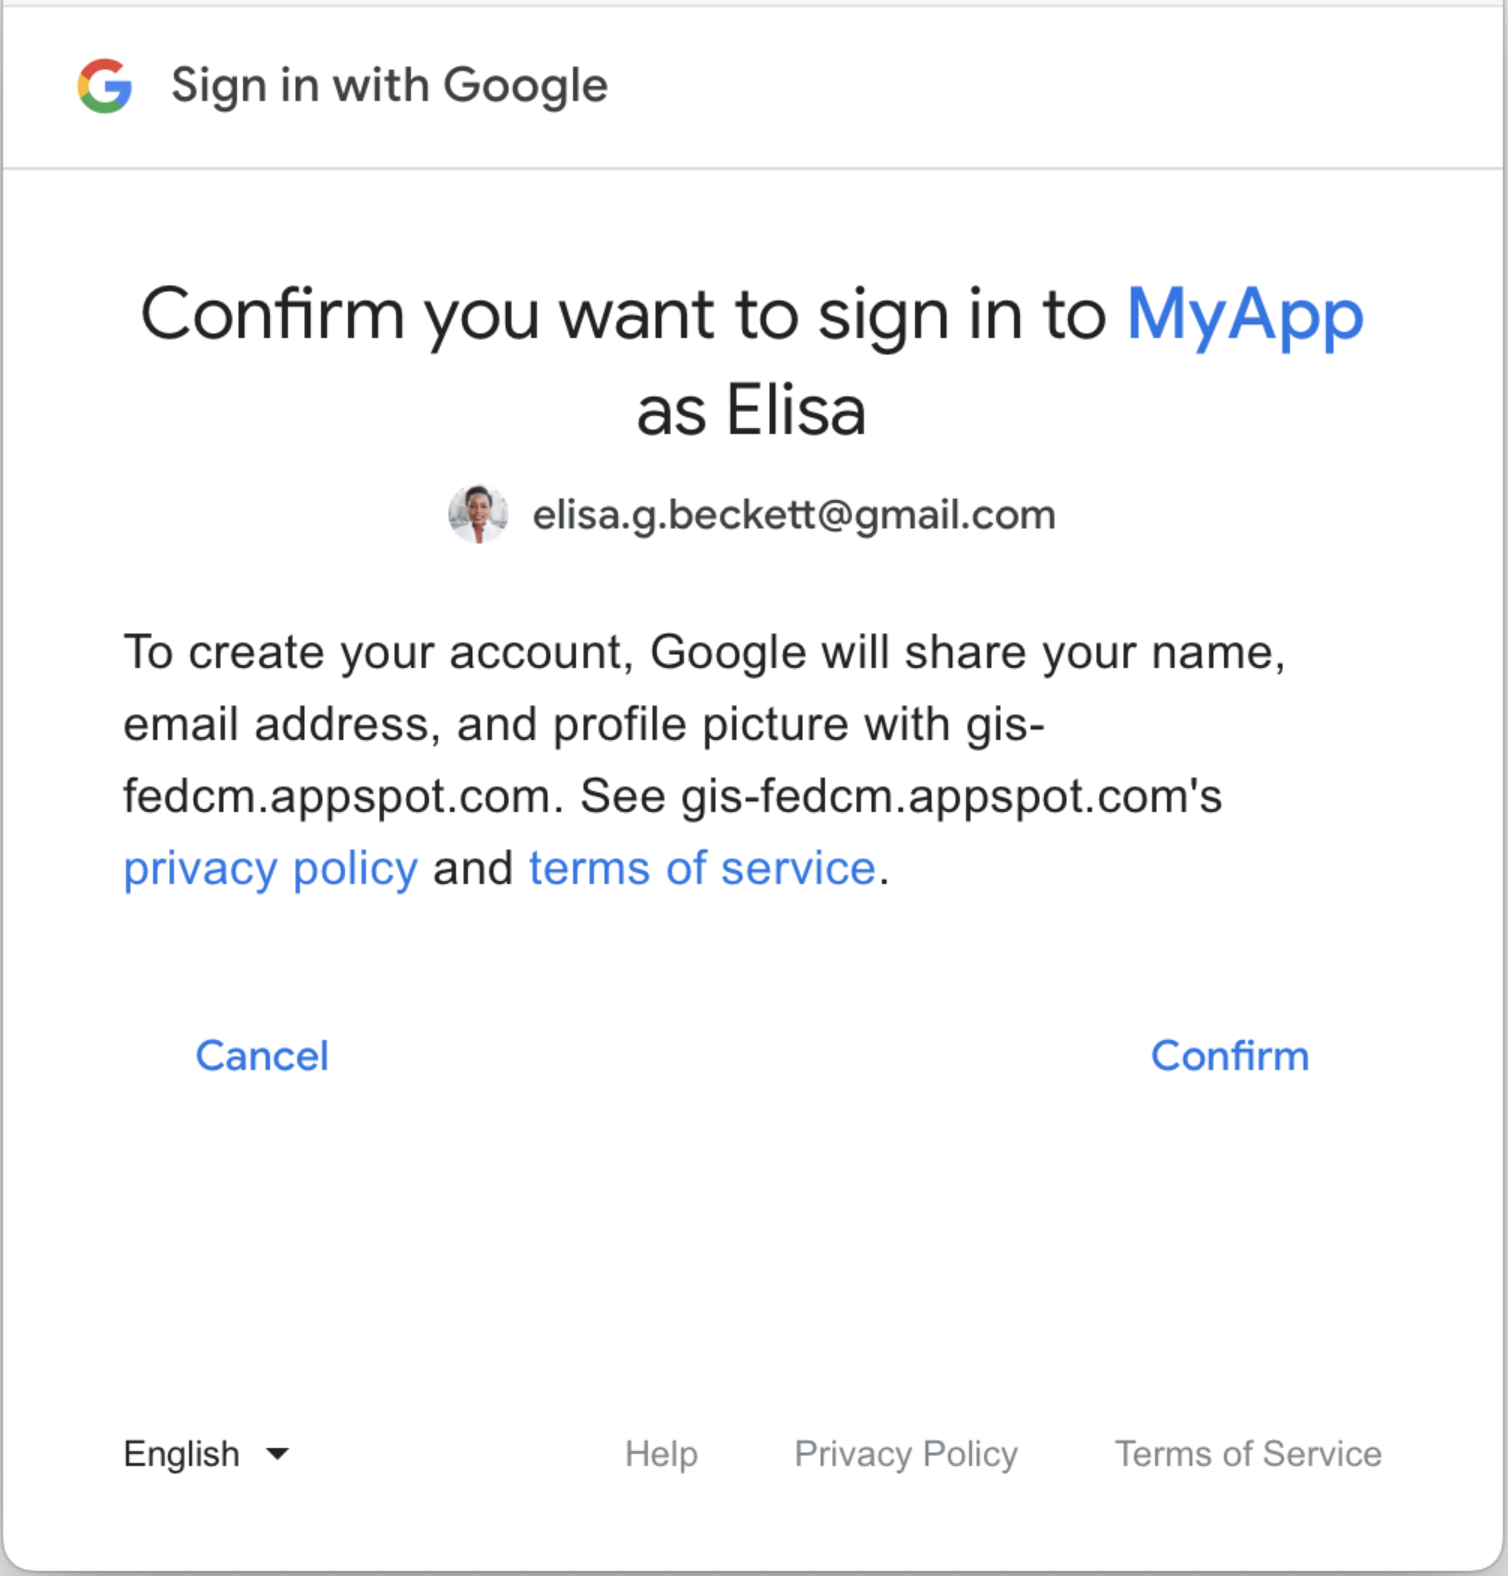 **Figure 3.** Sign-in dialog box